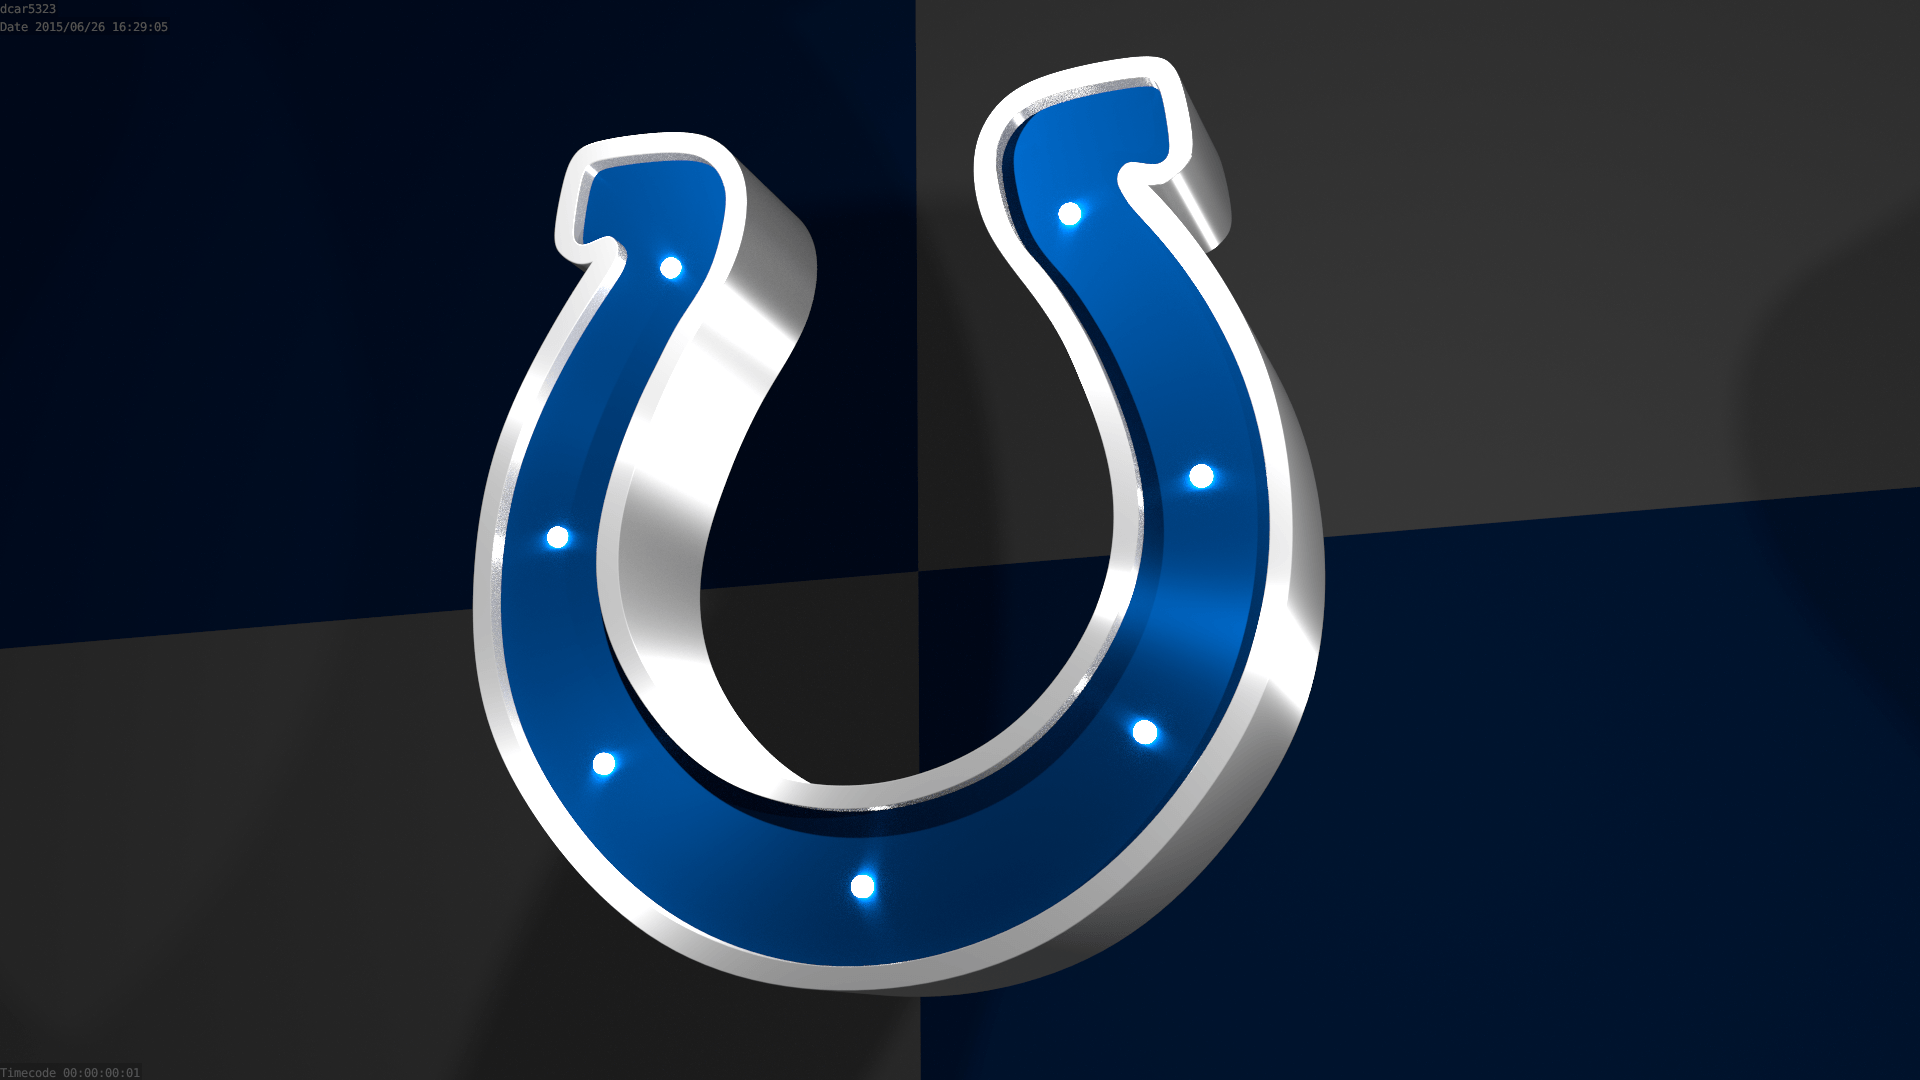 Colts Logo - I'm learning how to 3D Model, so I'm recreating NFL logos as